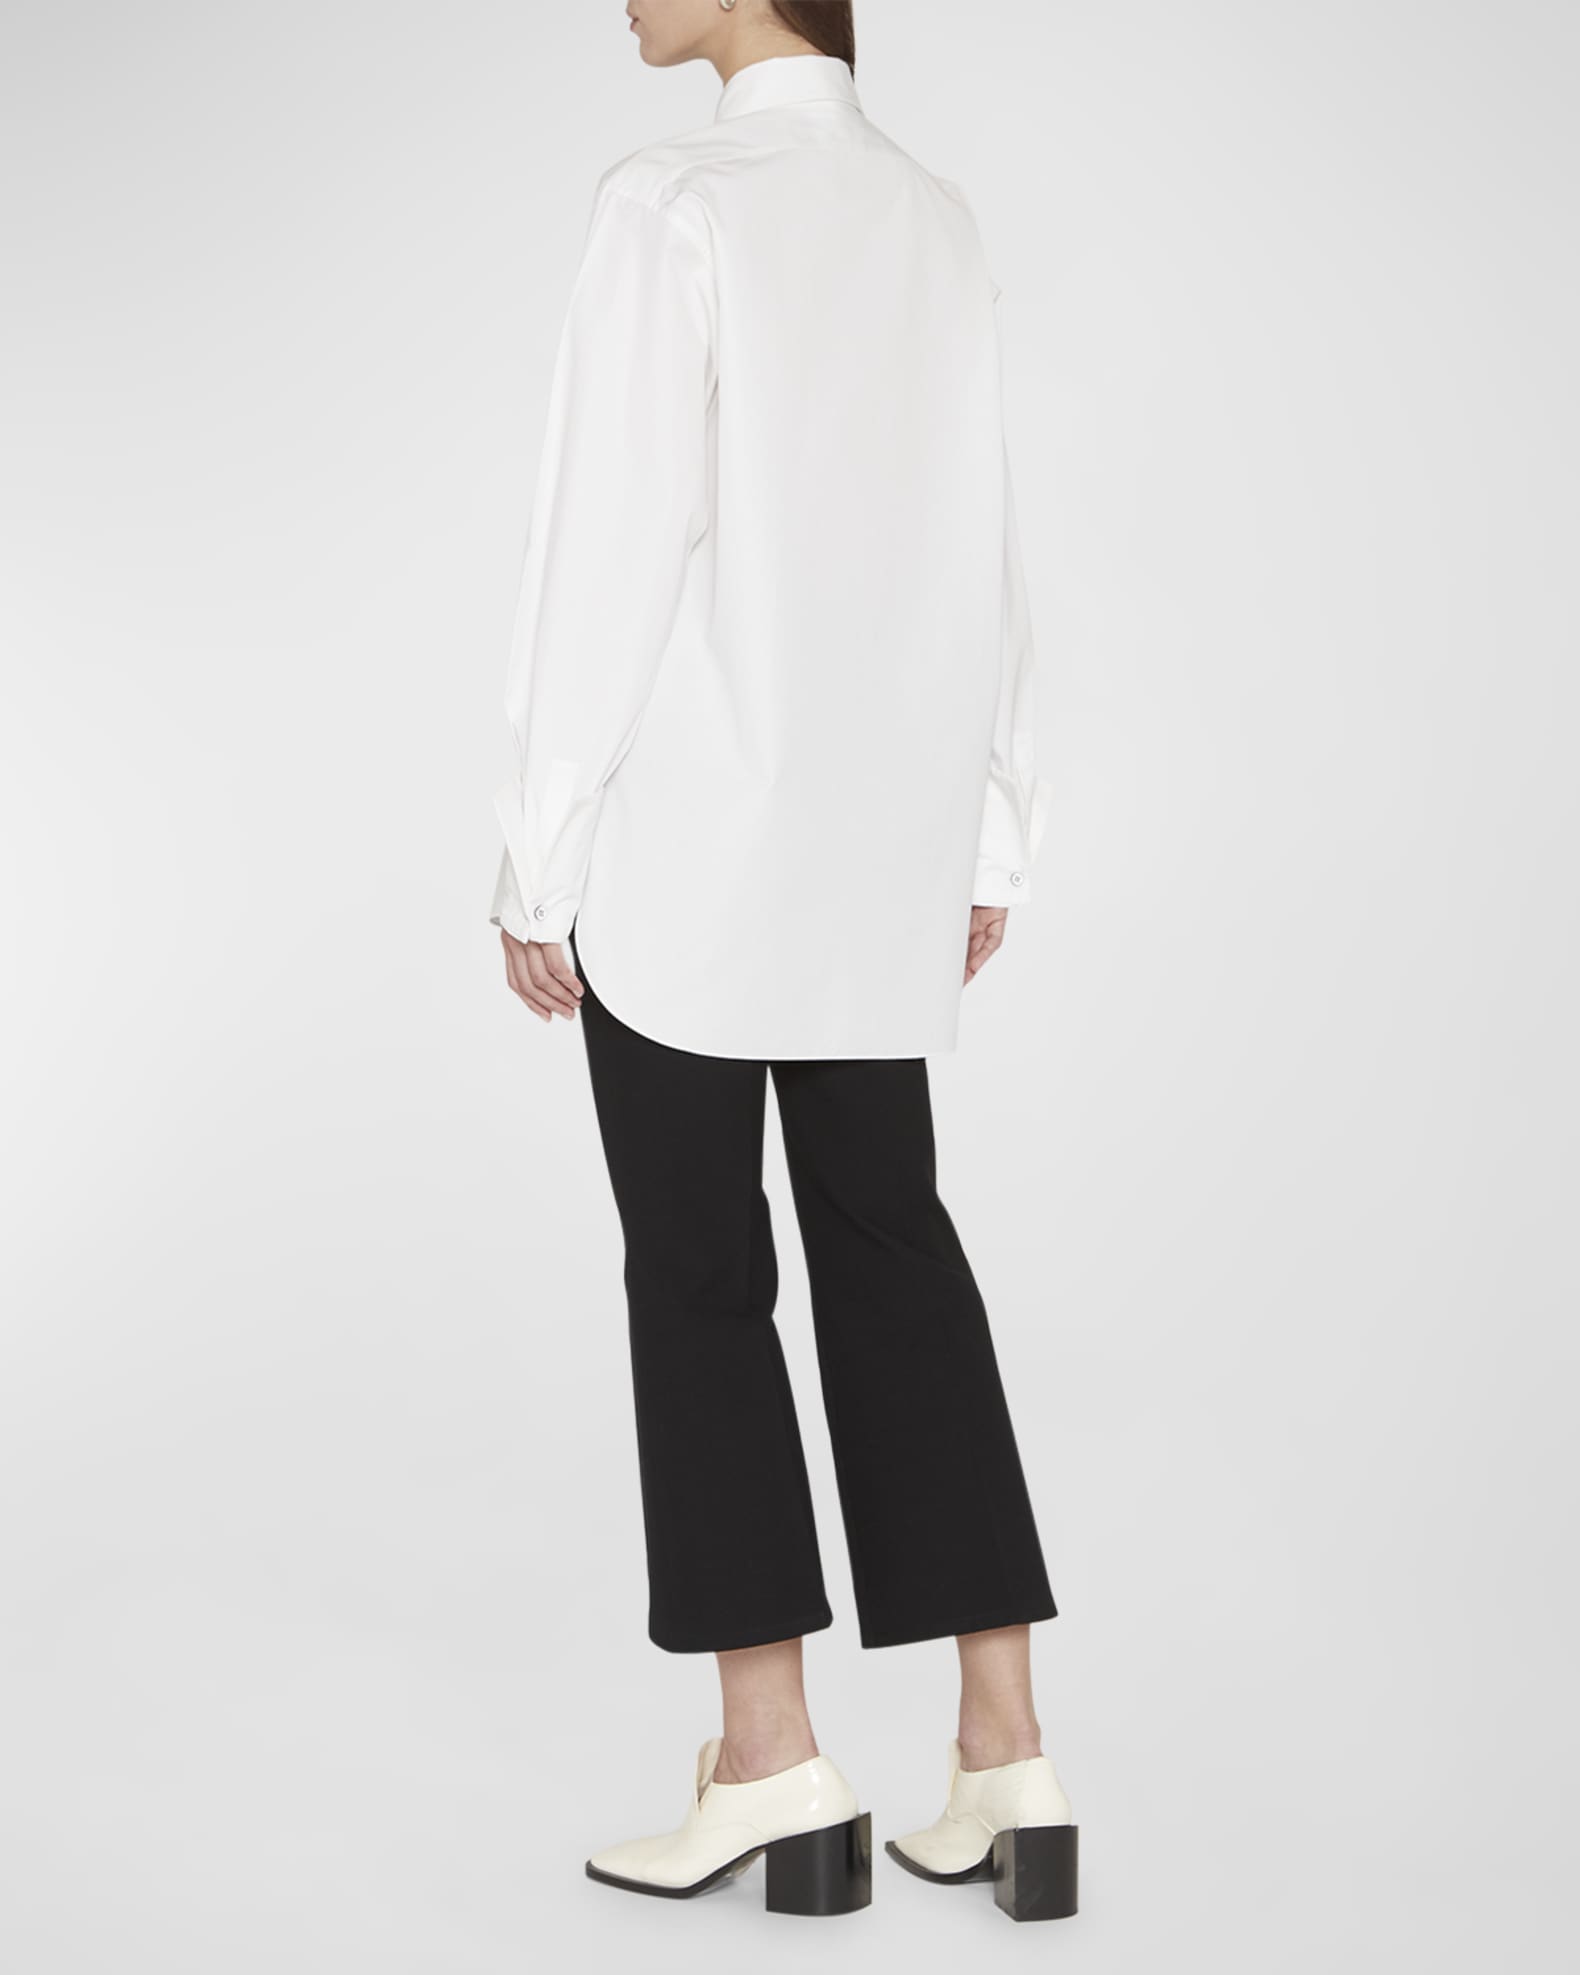 Jil Sander Collared Cotton Shirt with Pleated Plastron | Neiman Marcus